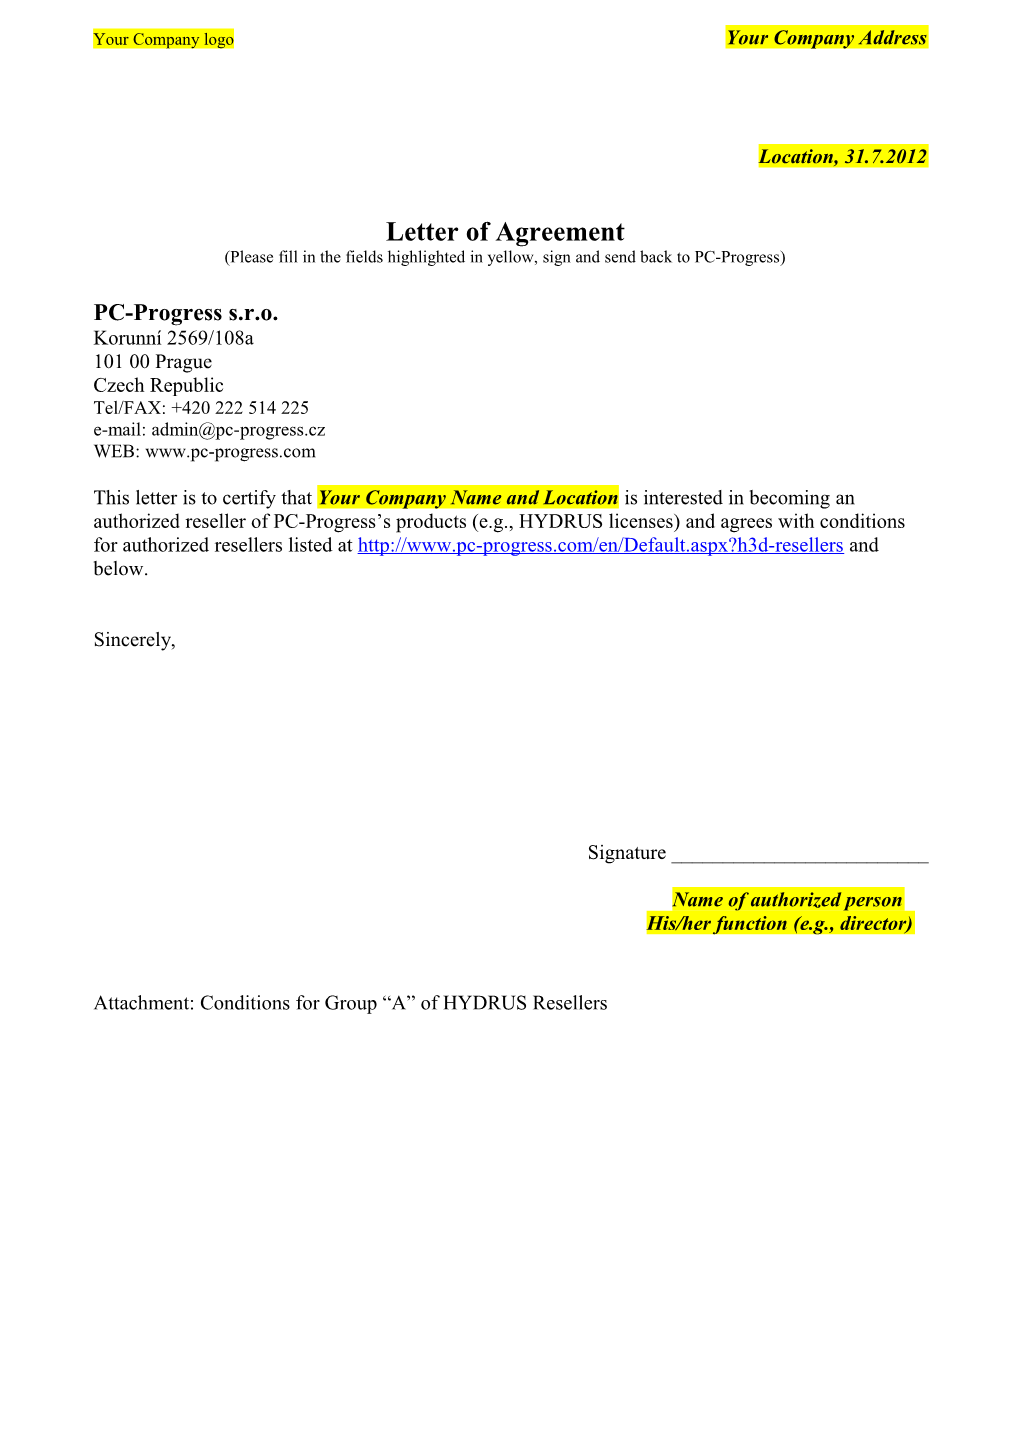 Letter of Agreement s10